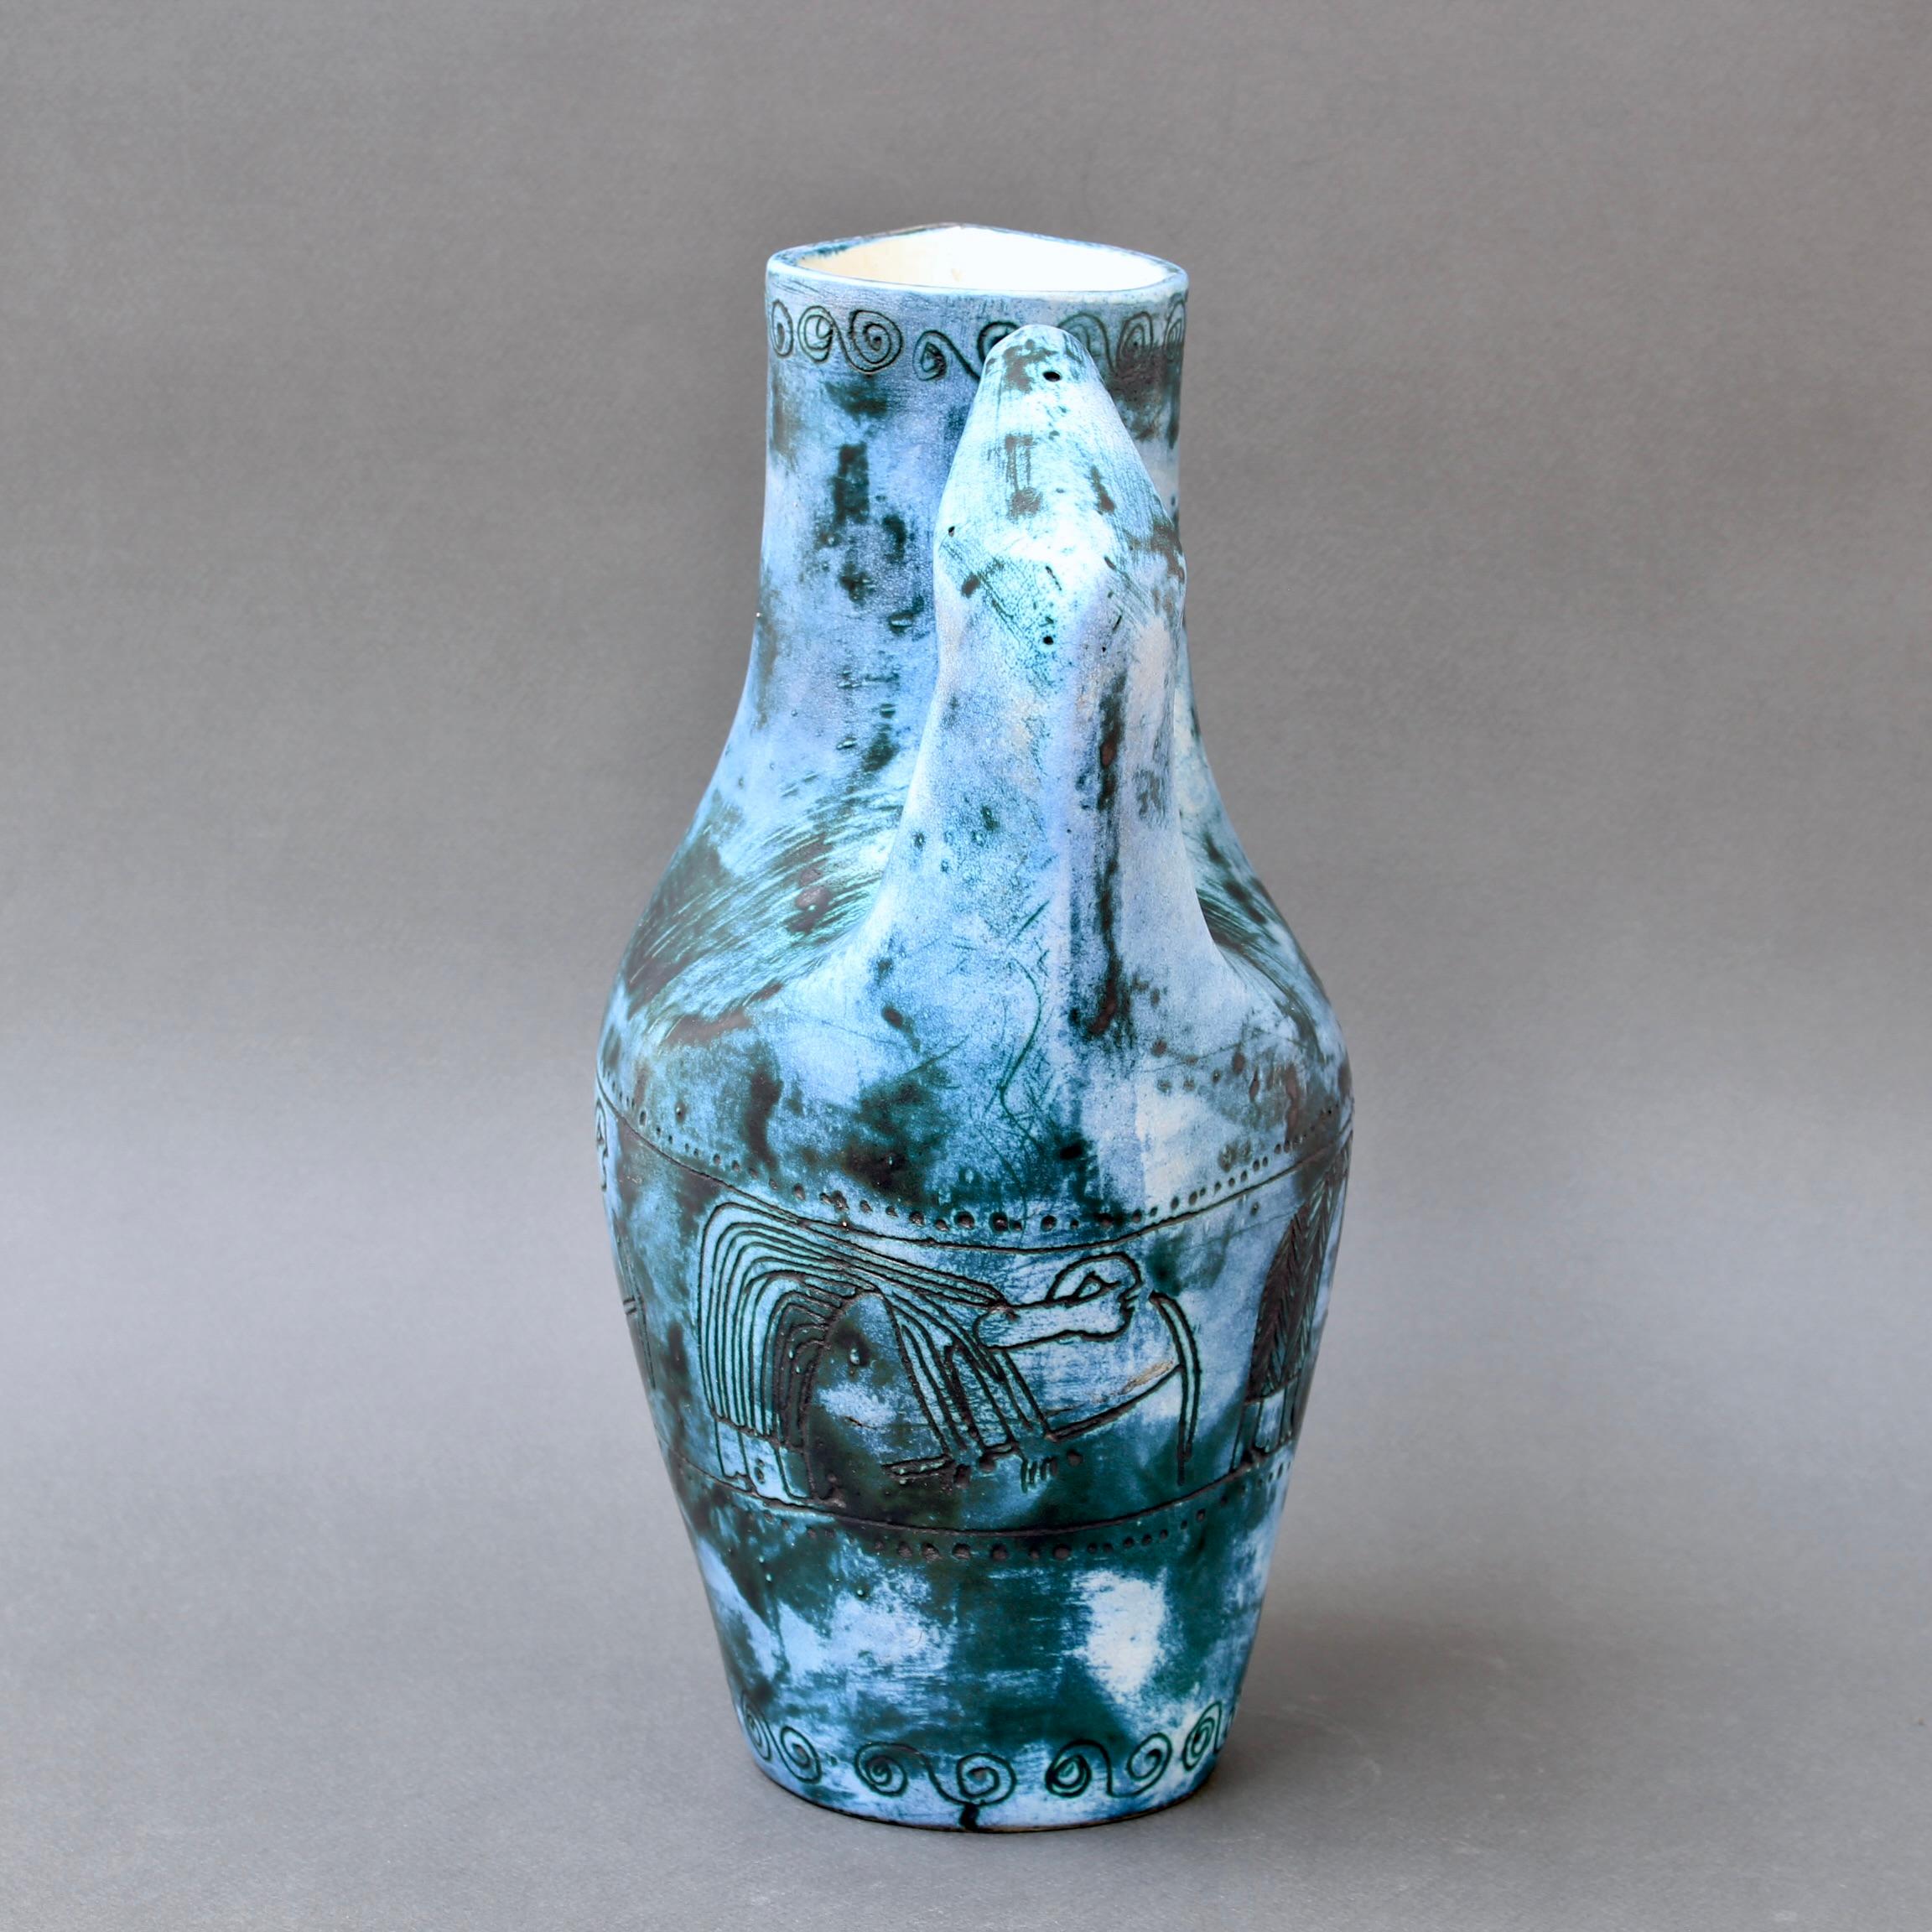 Vintage French ceramic decorative pitcher / decanter / vase (circa 1950s) by Jacques Blin. The vase is in a subtle blue hue covered in Blin's trademark misty glaze. It is decorated with a frieze of crouching figures planting the fields supported